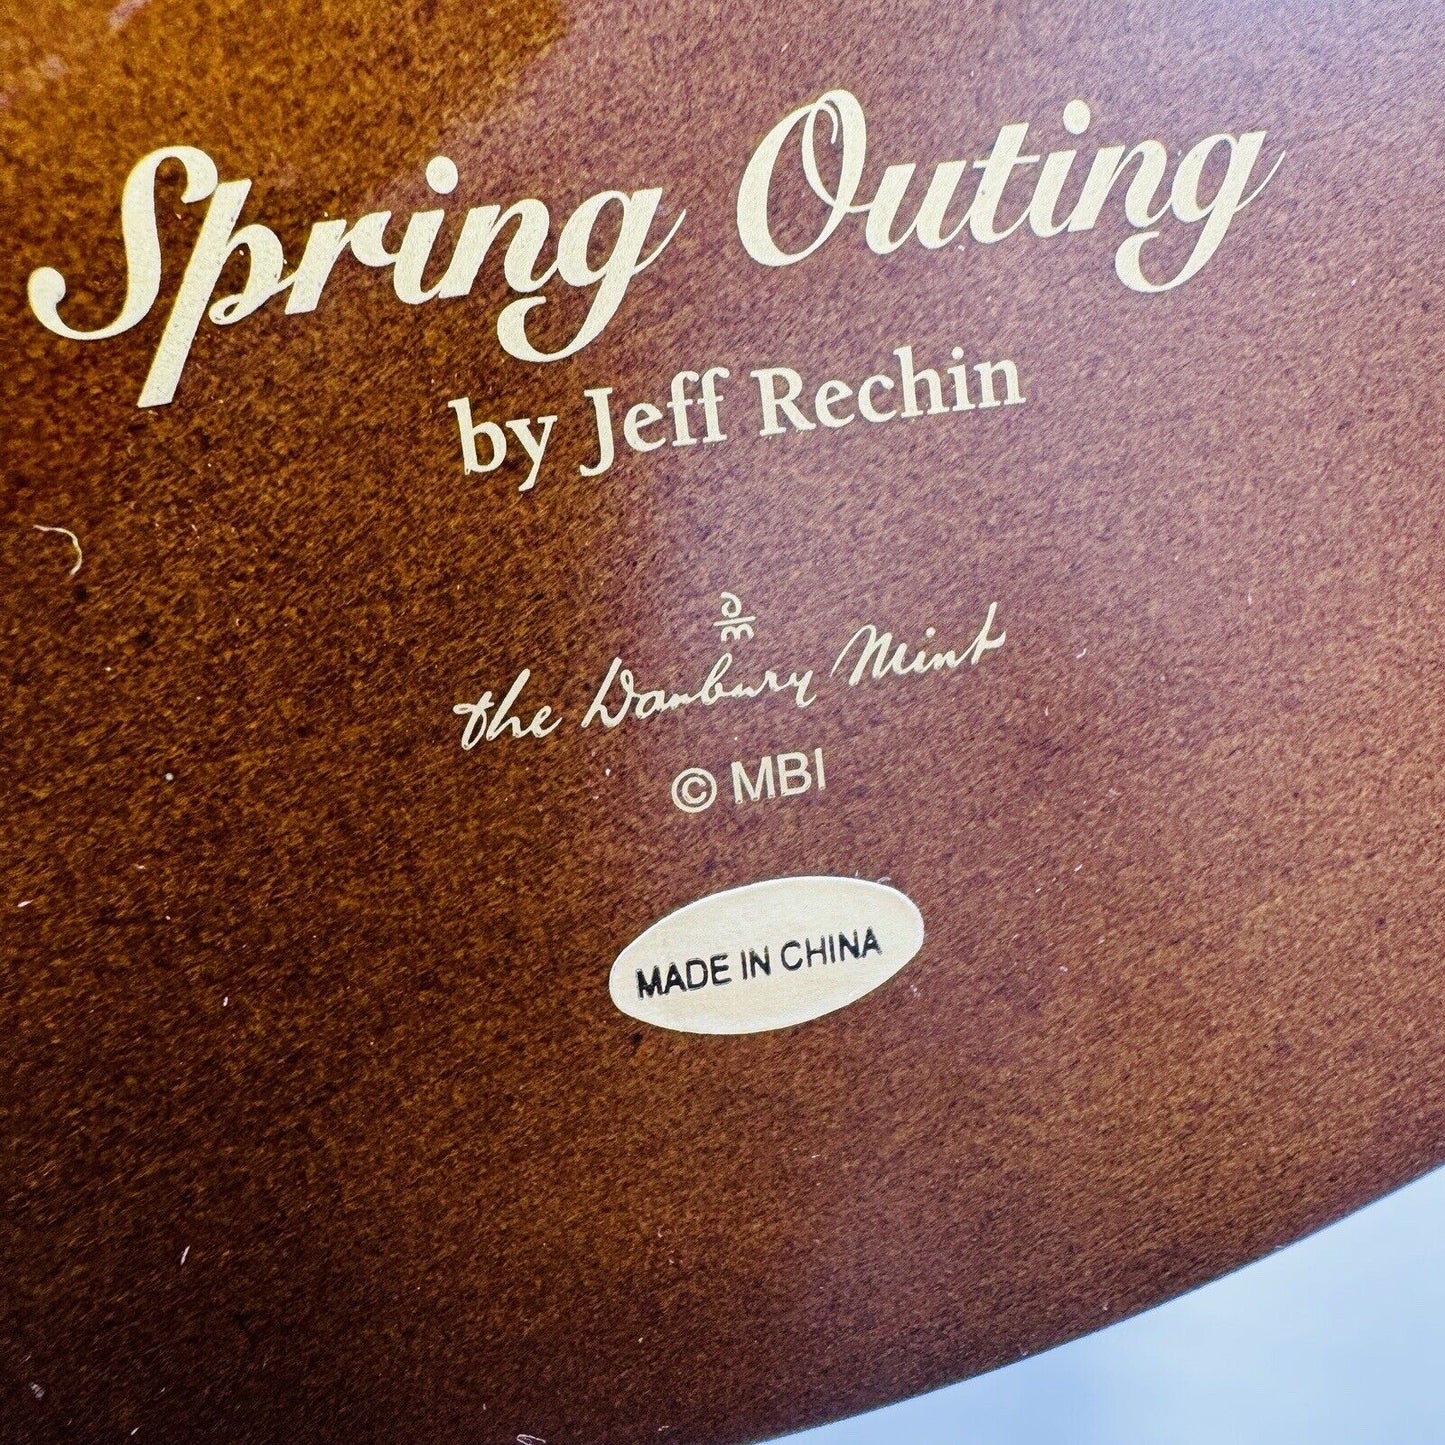 The Danbury mint spring outing by Jeff Rechin cardinals figurine Made